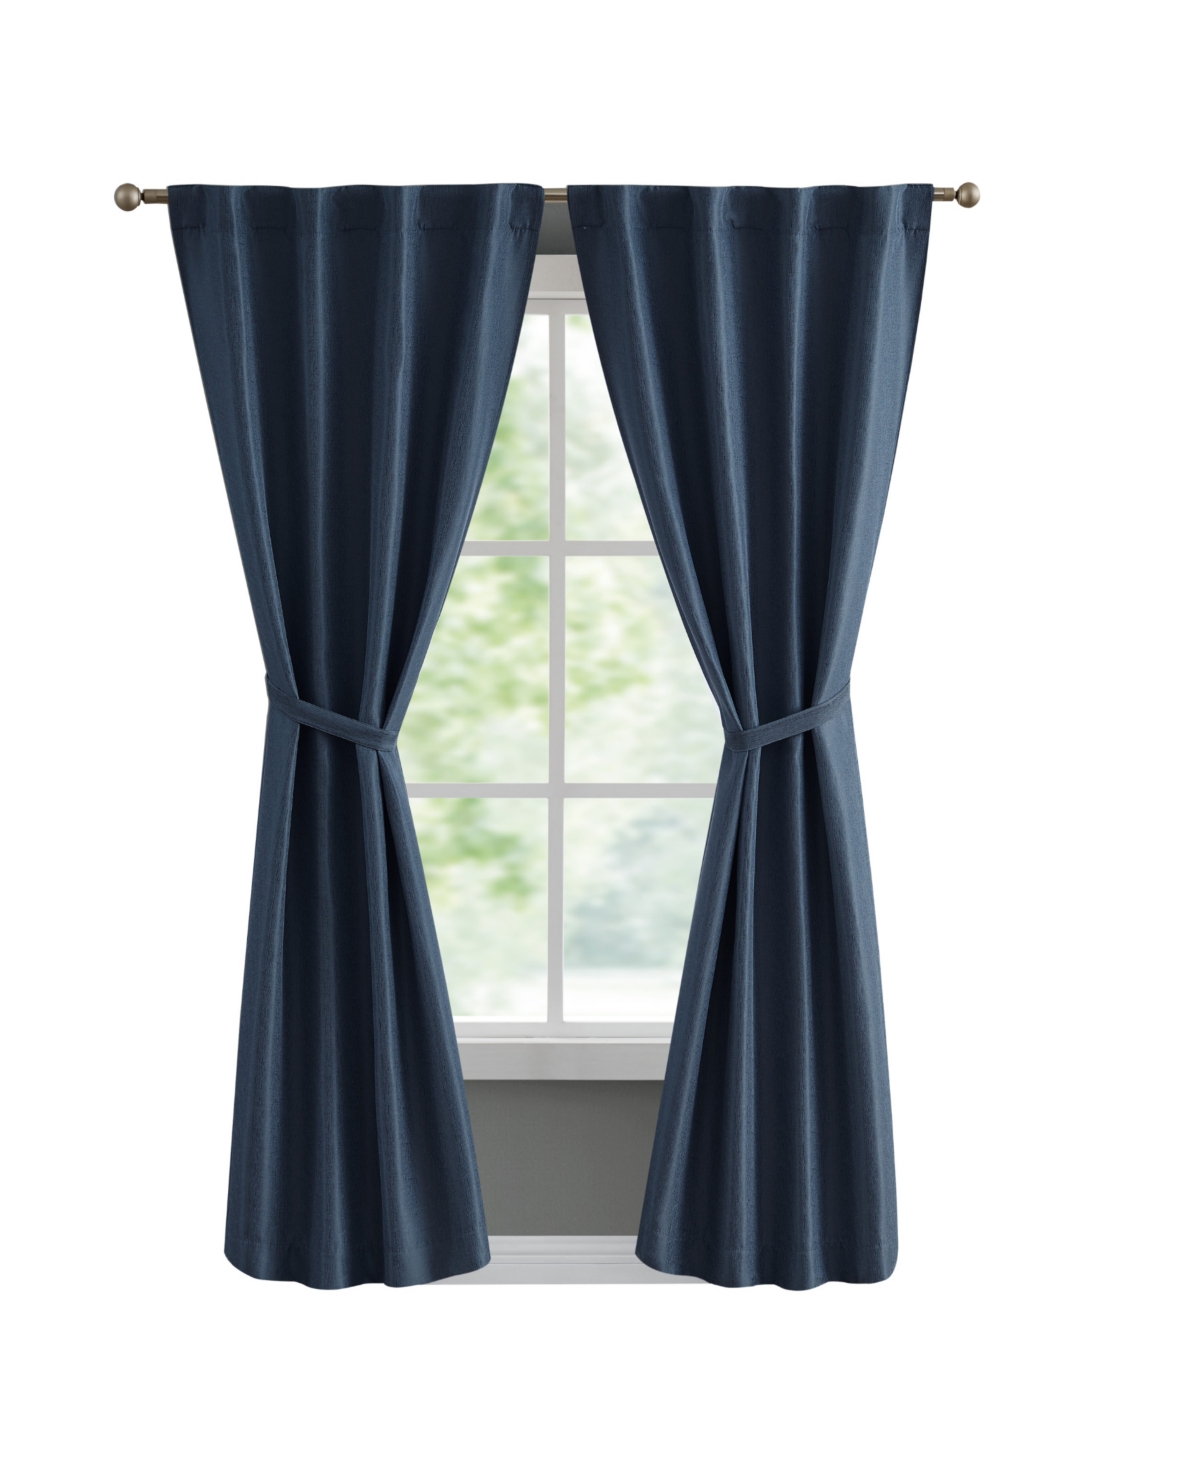 French Connection Val Thermal Woven Room Darkening Back Tab Window Curtain Panel Pair With Tiebacks, 38" X 84" In Indigo